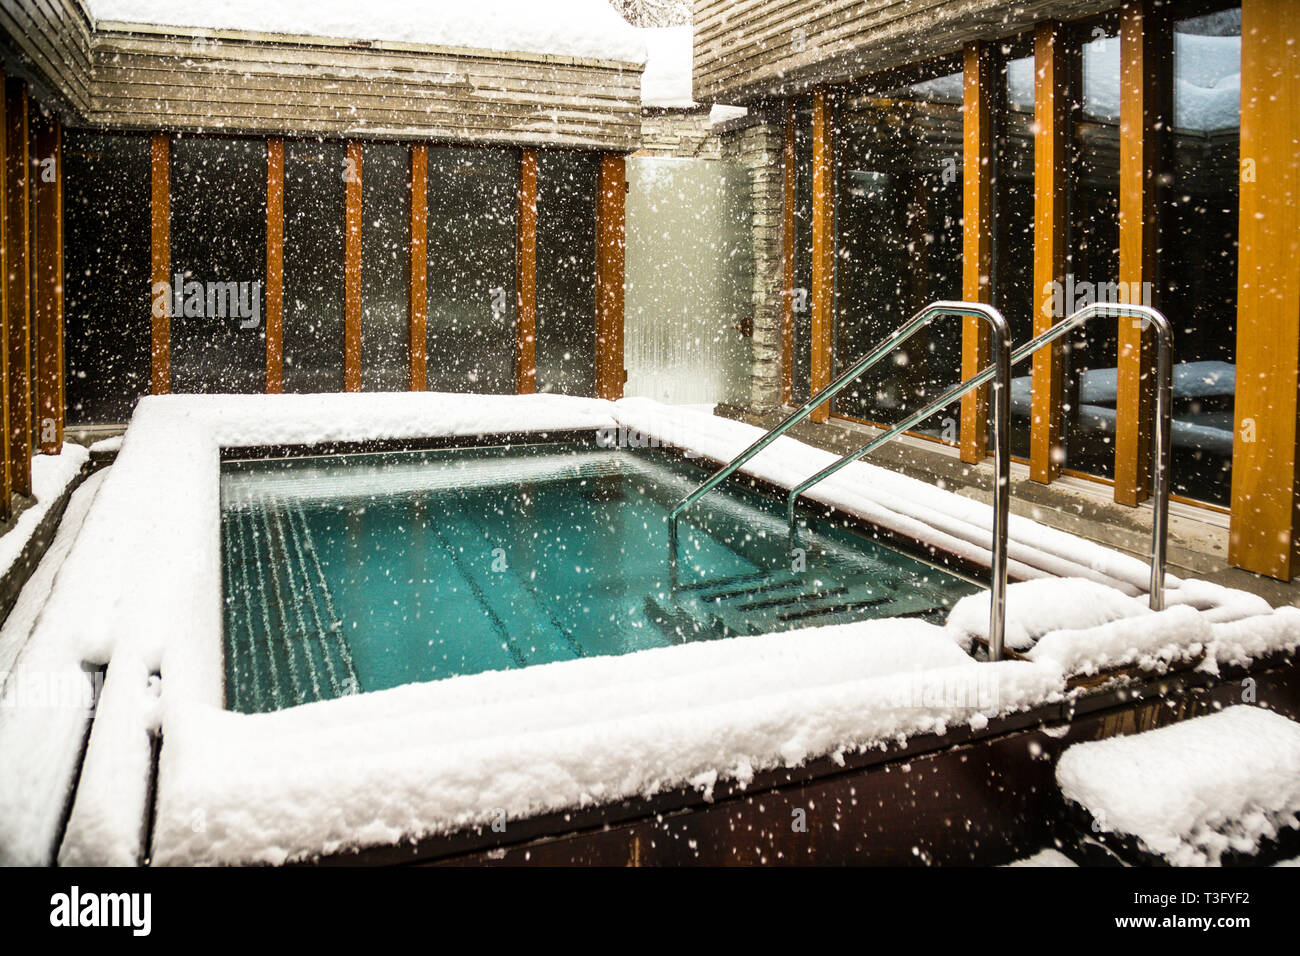 Snow on Outdoor Swimming Pool of Hotel Waldhaus in Sils im Engadin/Segl, Switzerland. Modernization with measure: the pool of the spa area in the snow Stock Photo